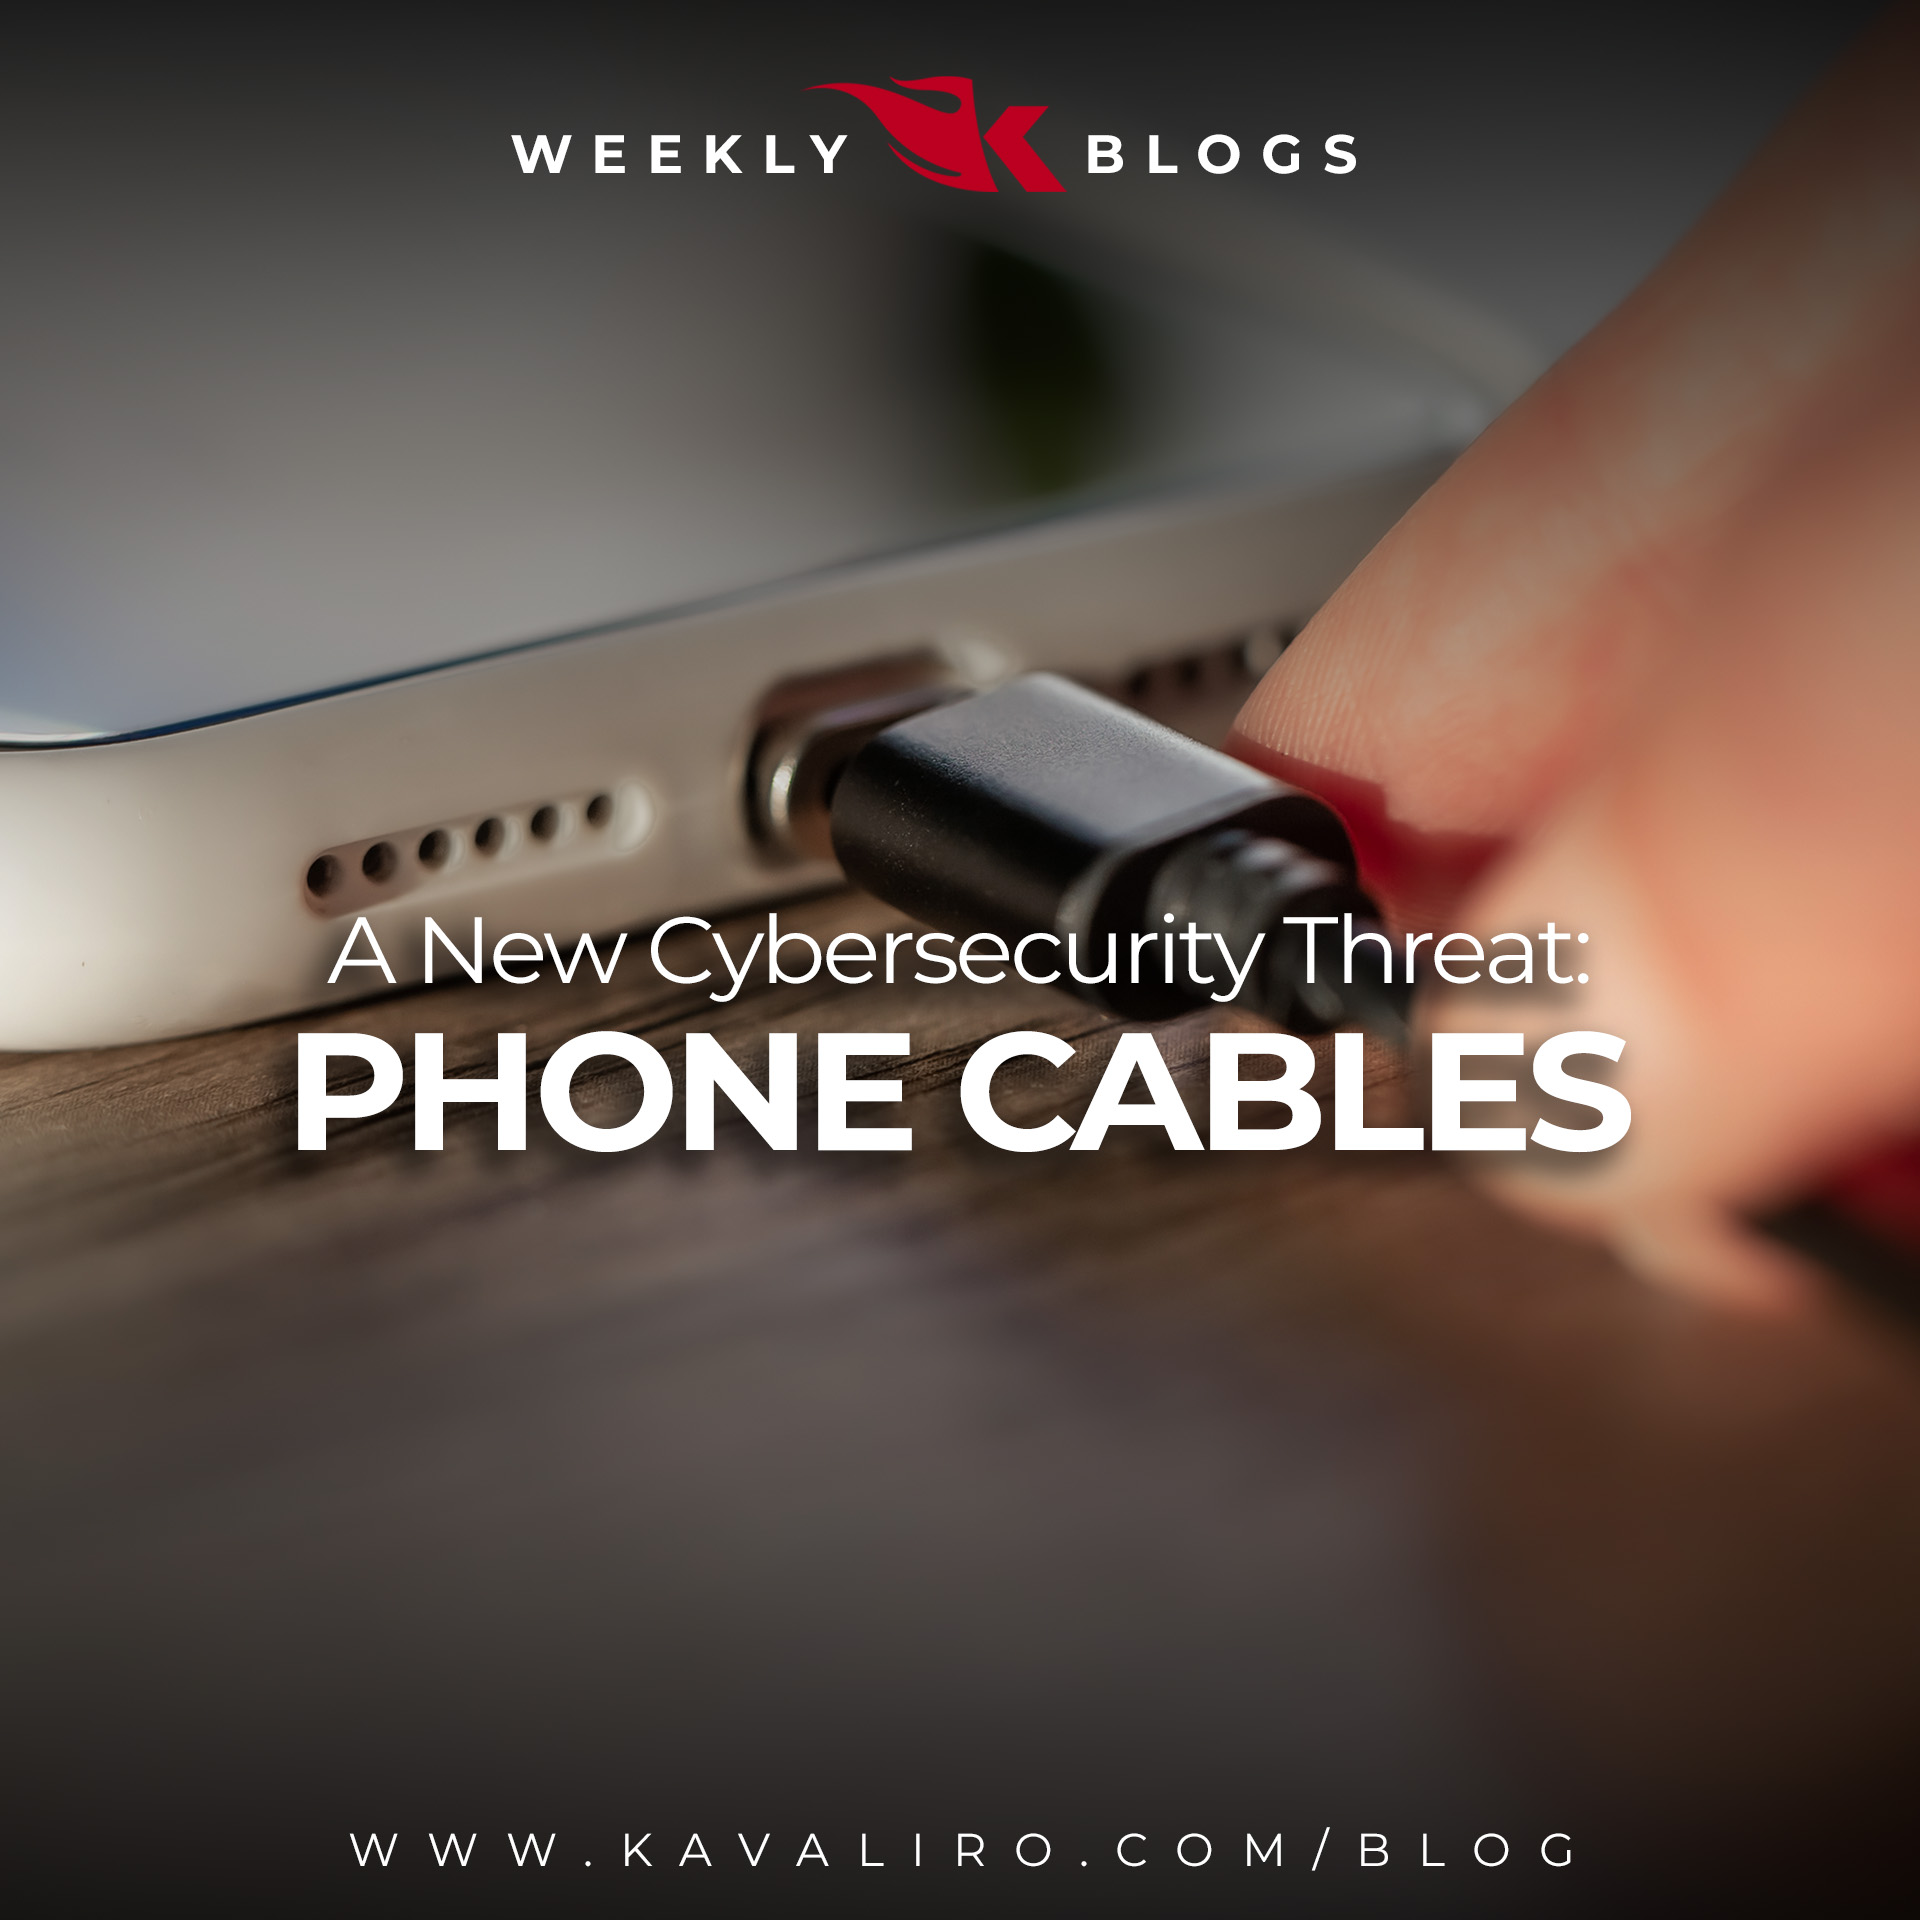 New Cybersecurity Threat: Phone Cables